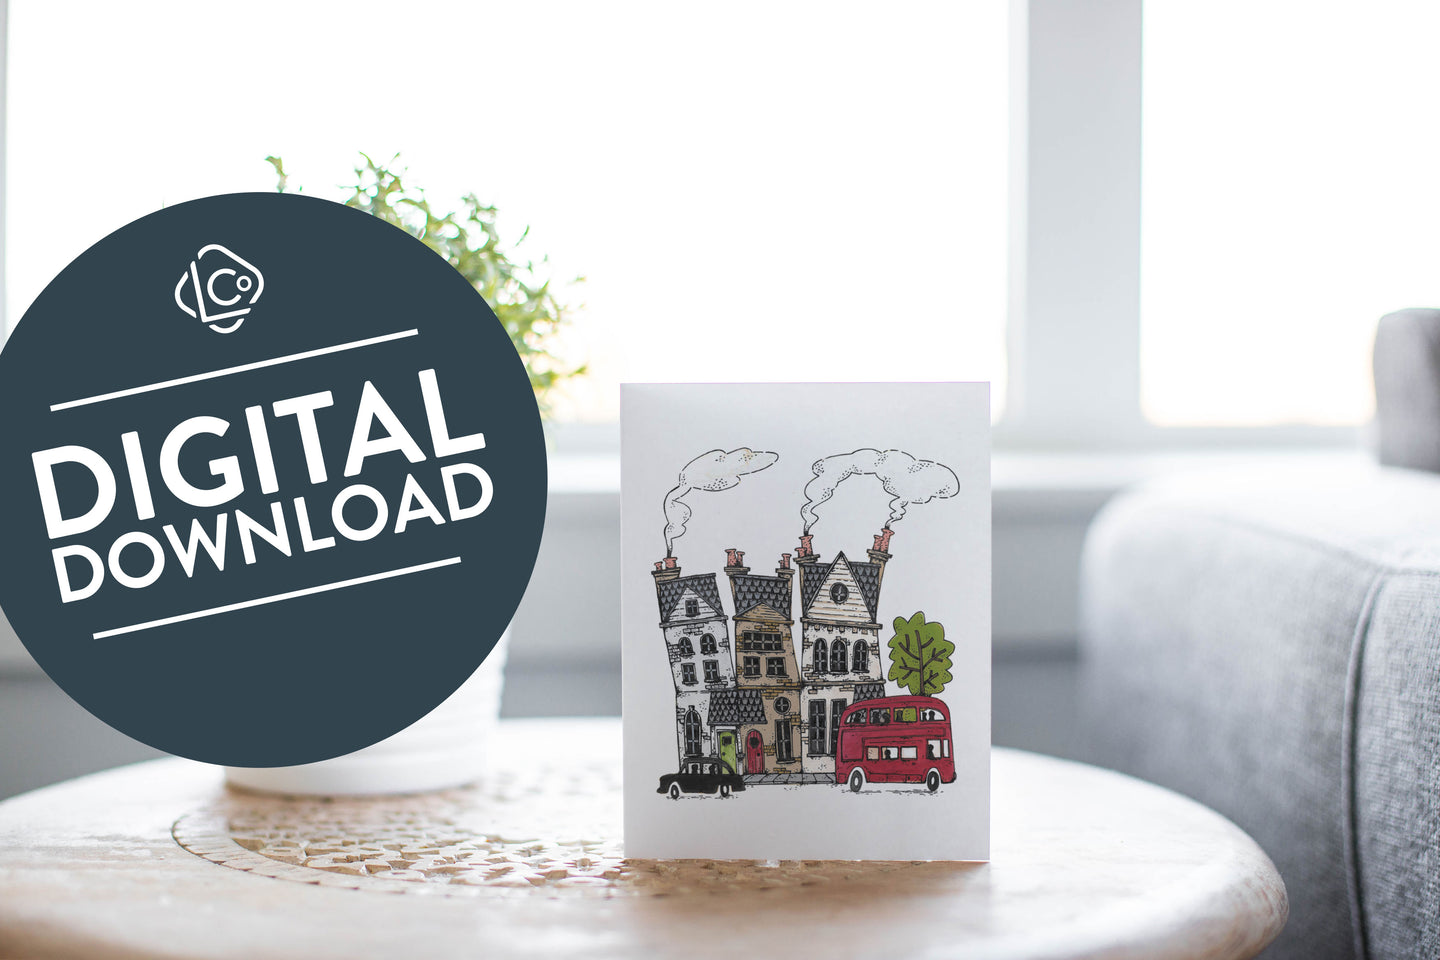 A greeting card laying on a wooden table with some cut wood details. The card features the a design with illustrated London houses, a black taxi cab and a red double decker bus. The words 